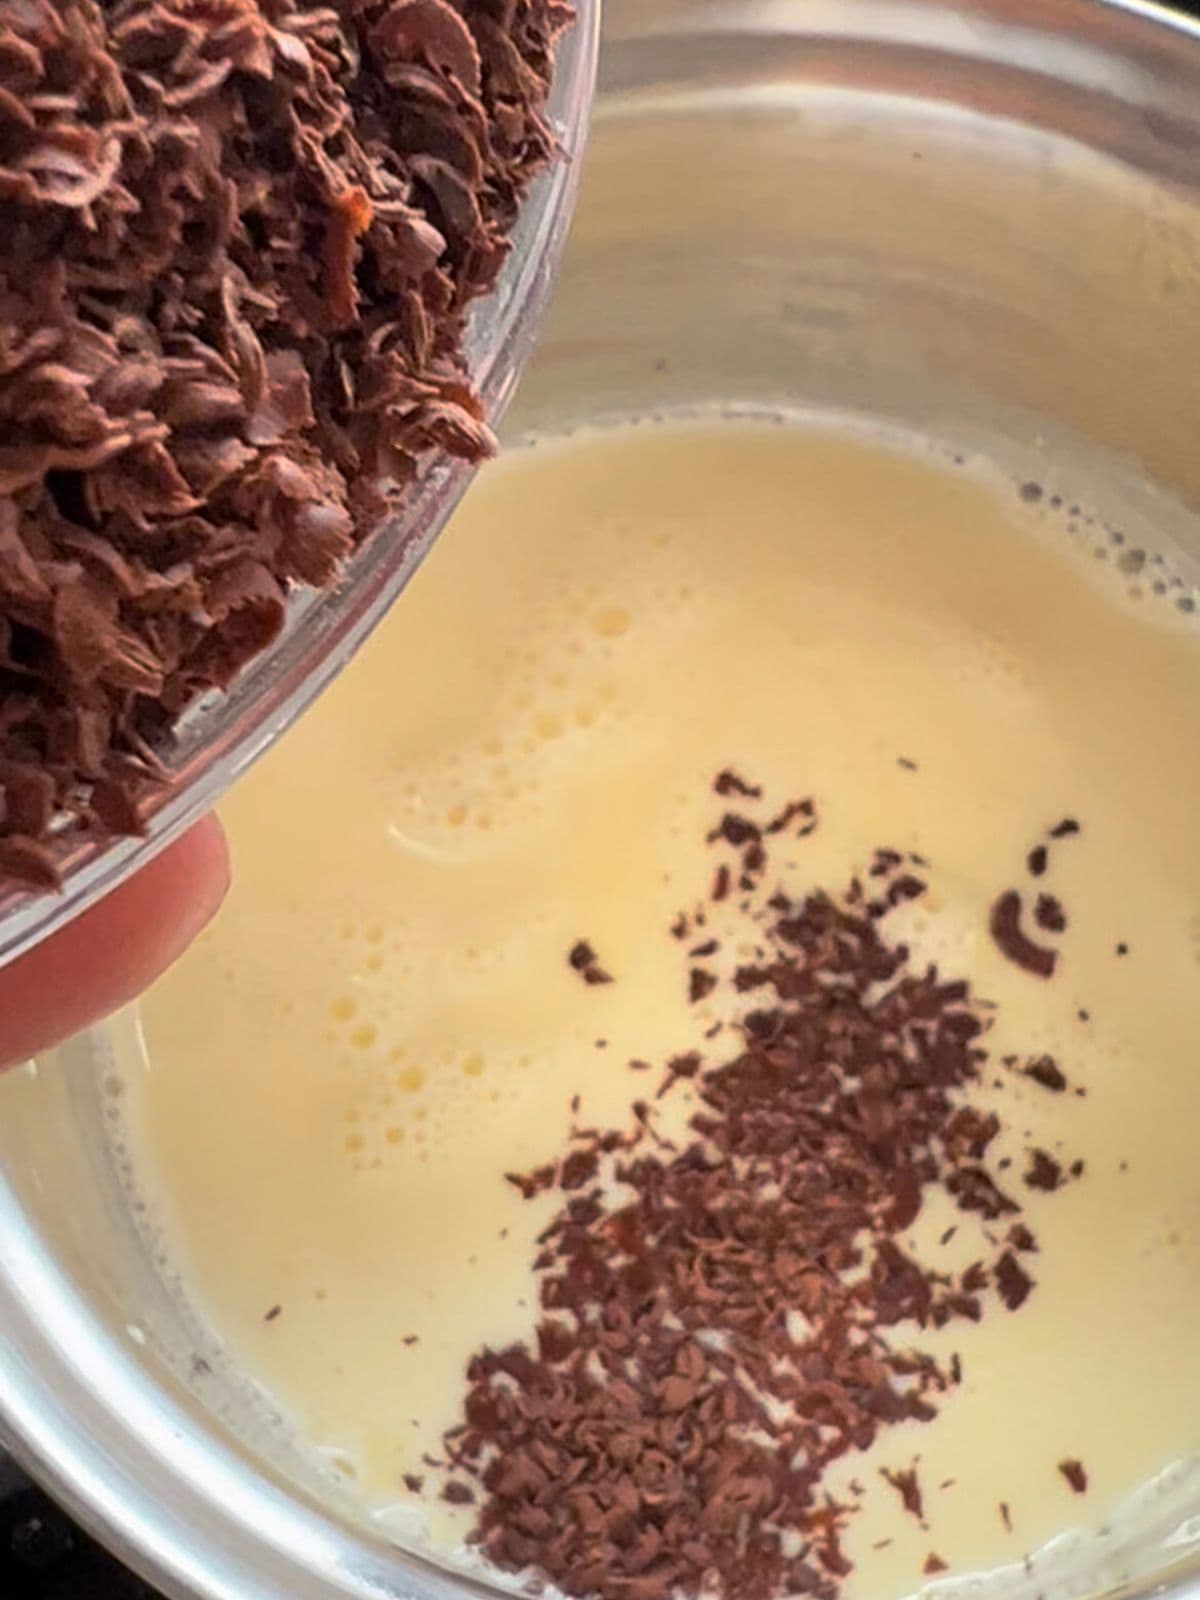 Pouring grated cocoa into the cream in pan.